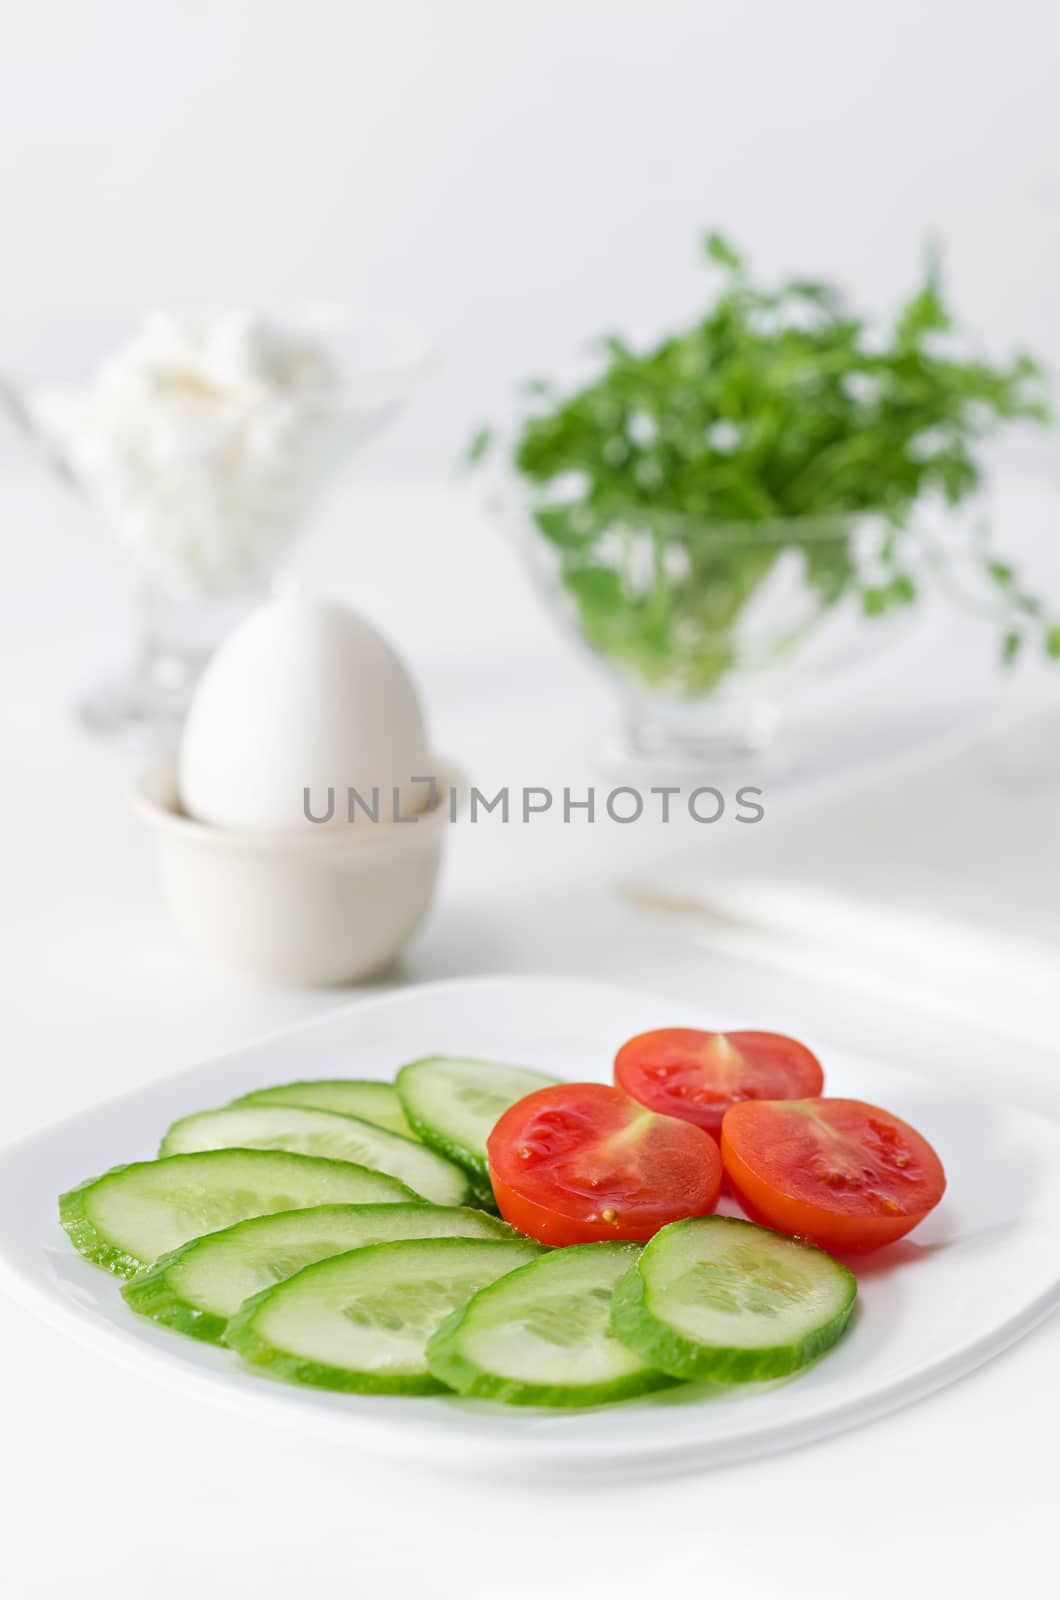 Sliced tomato and cucumber on a plate for Breakfast. The egg in the stand, herbs and cheese. High key on white background and selective focus.